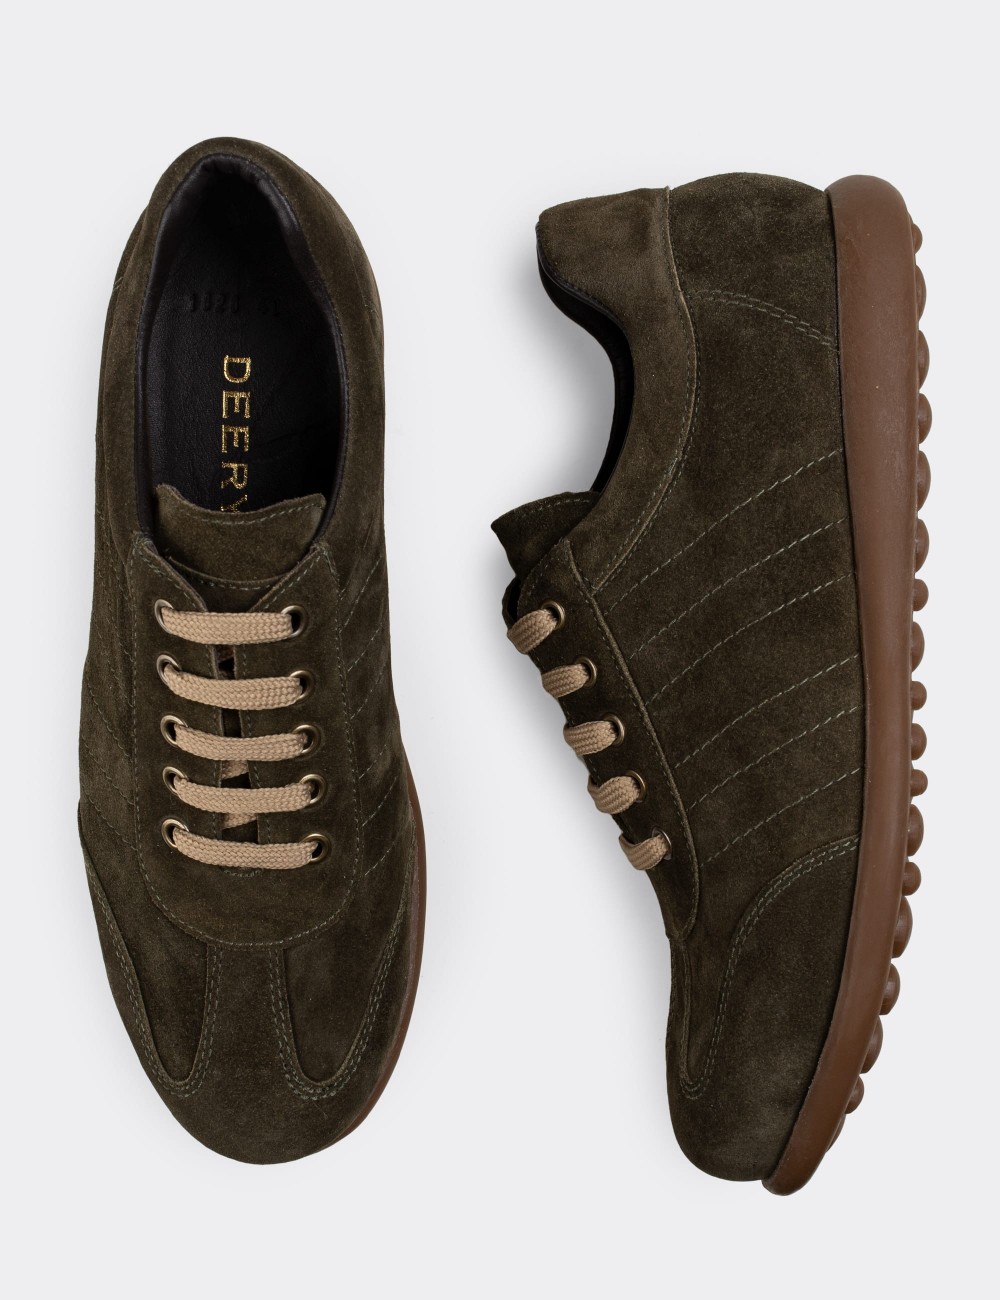 Green Suede Leather Lace-up Shoes - 01826MHAKC02